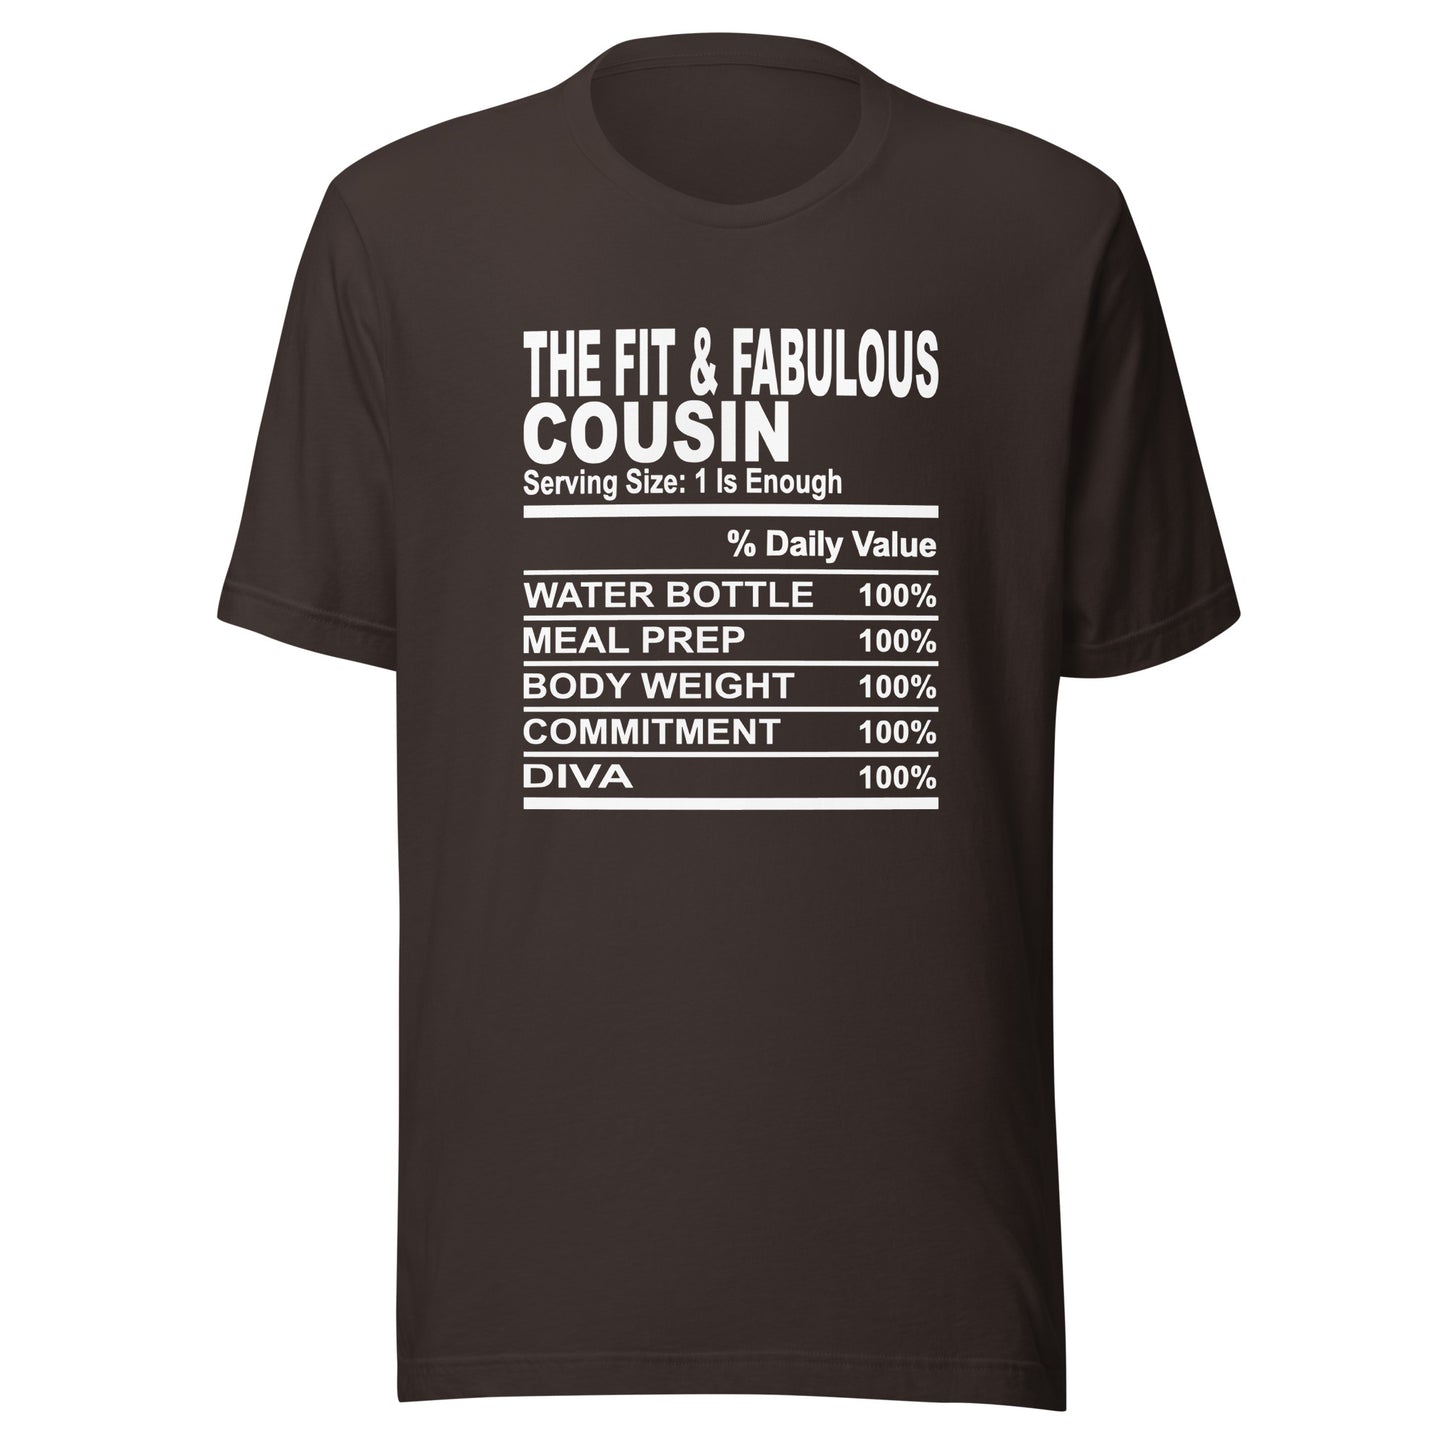 THE FIT AND FABULOUS COUSIN - 2XL-3XL - Unisex T-Shirt (white print)